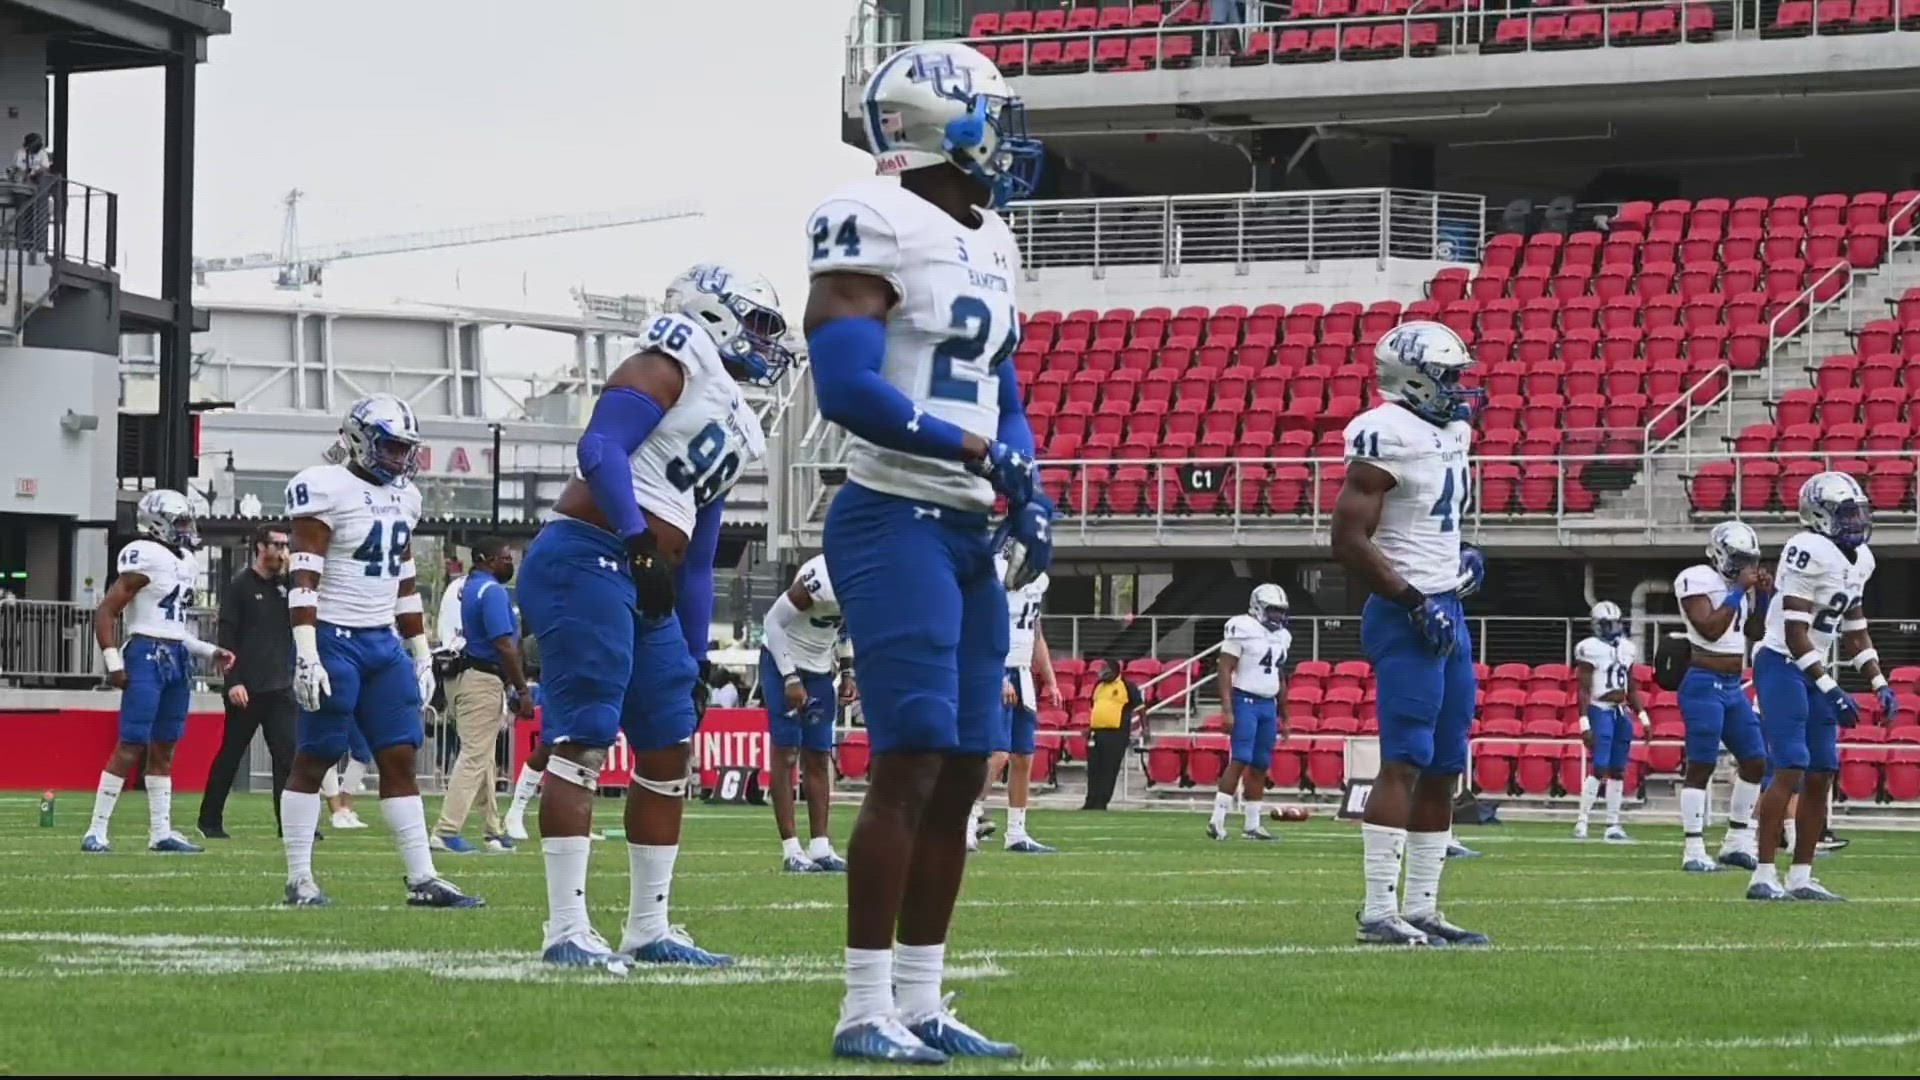 We spoke with the President of Hampton University about what the game means.